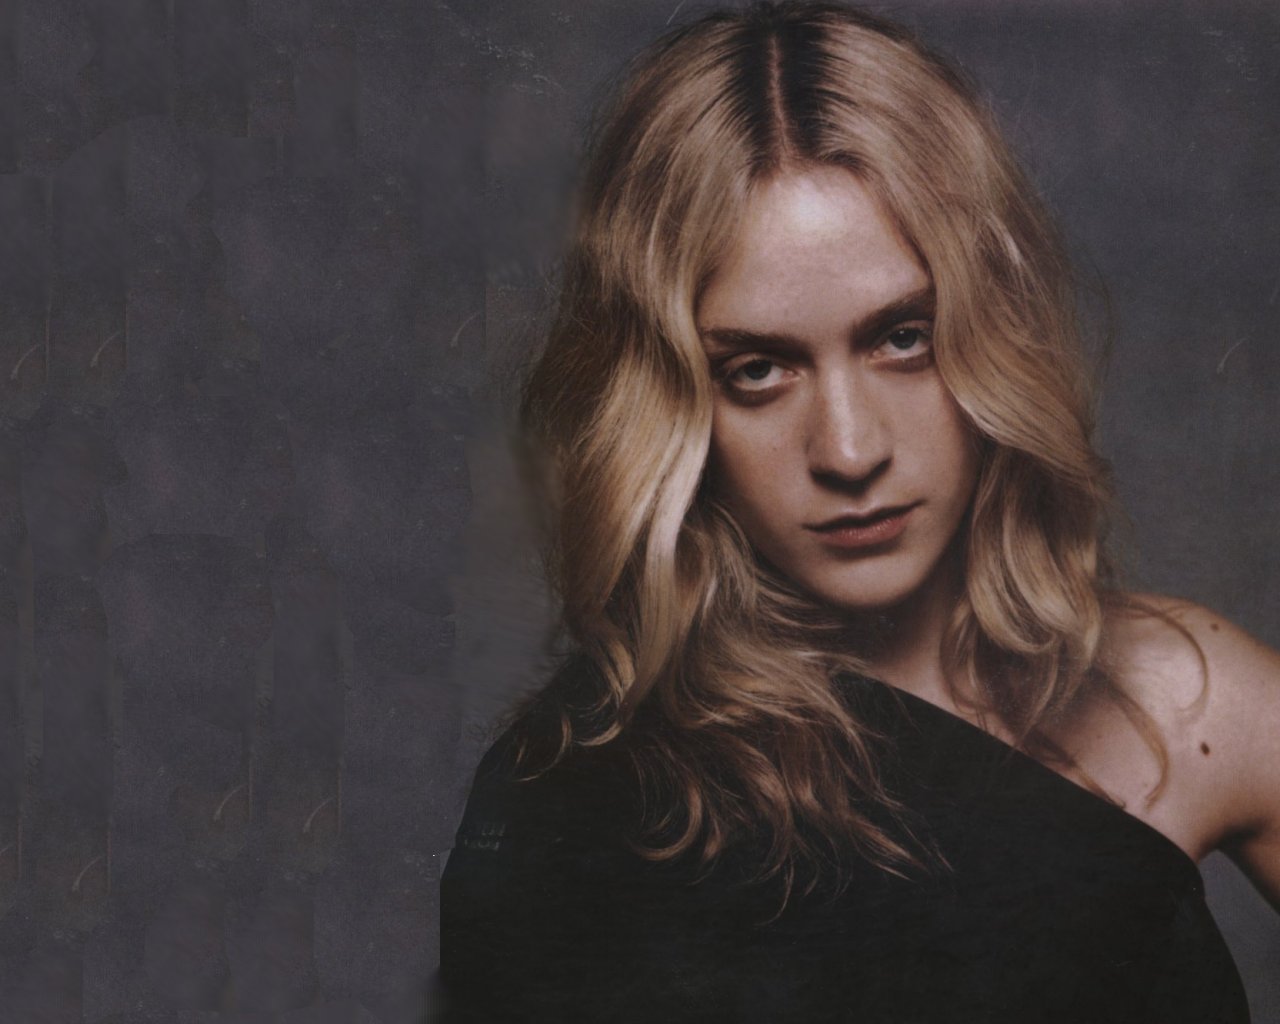 chloë sevigny, images, image, wallpaper, photos, photo, photograph, gallery...